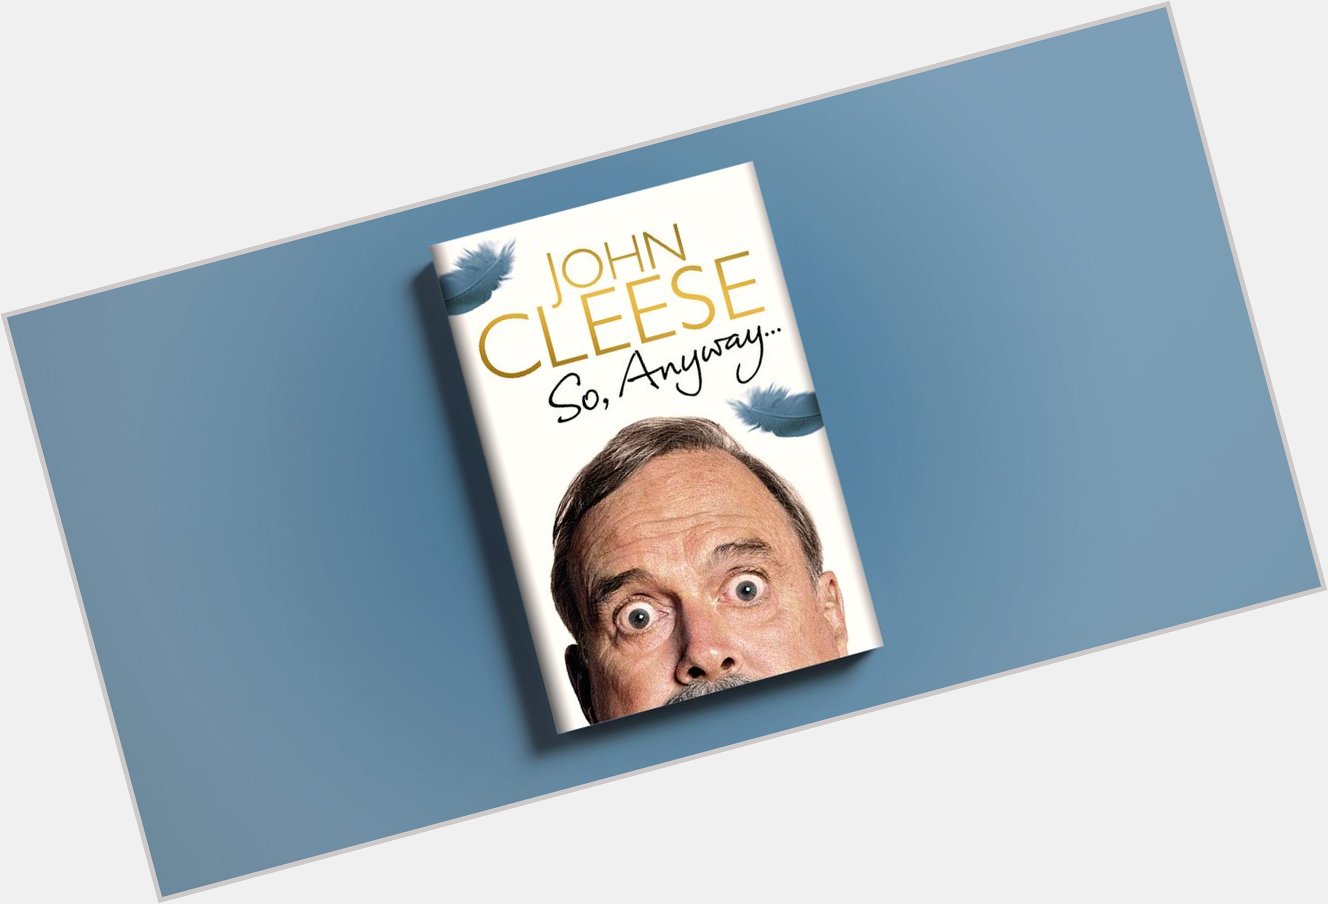 Happy birthday to John Cleese! Do you have a favourite John Cleese quote?
 